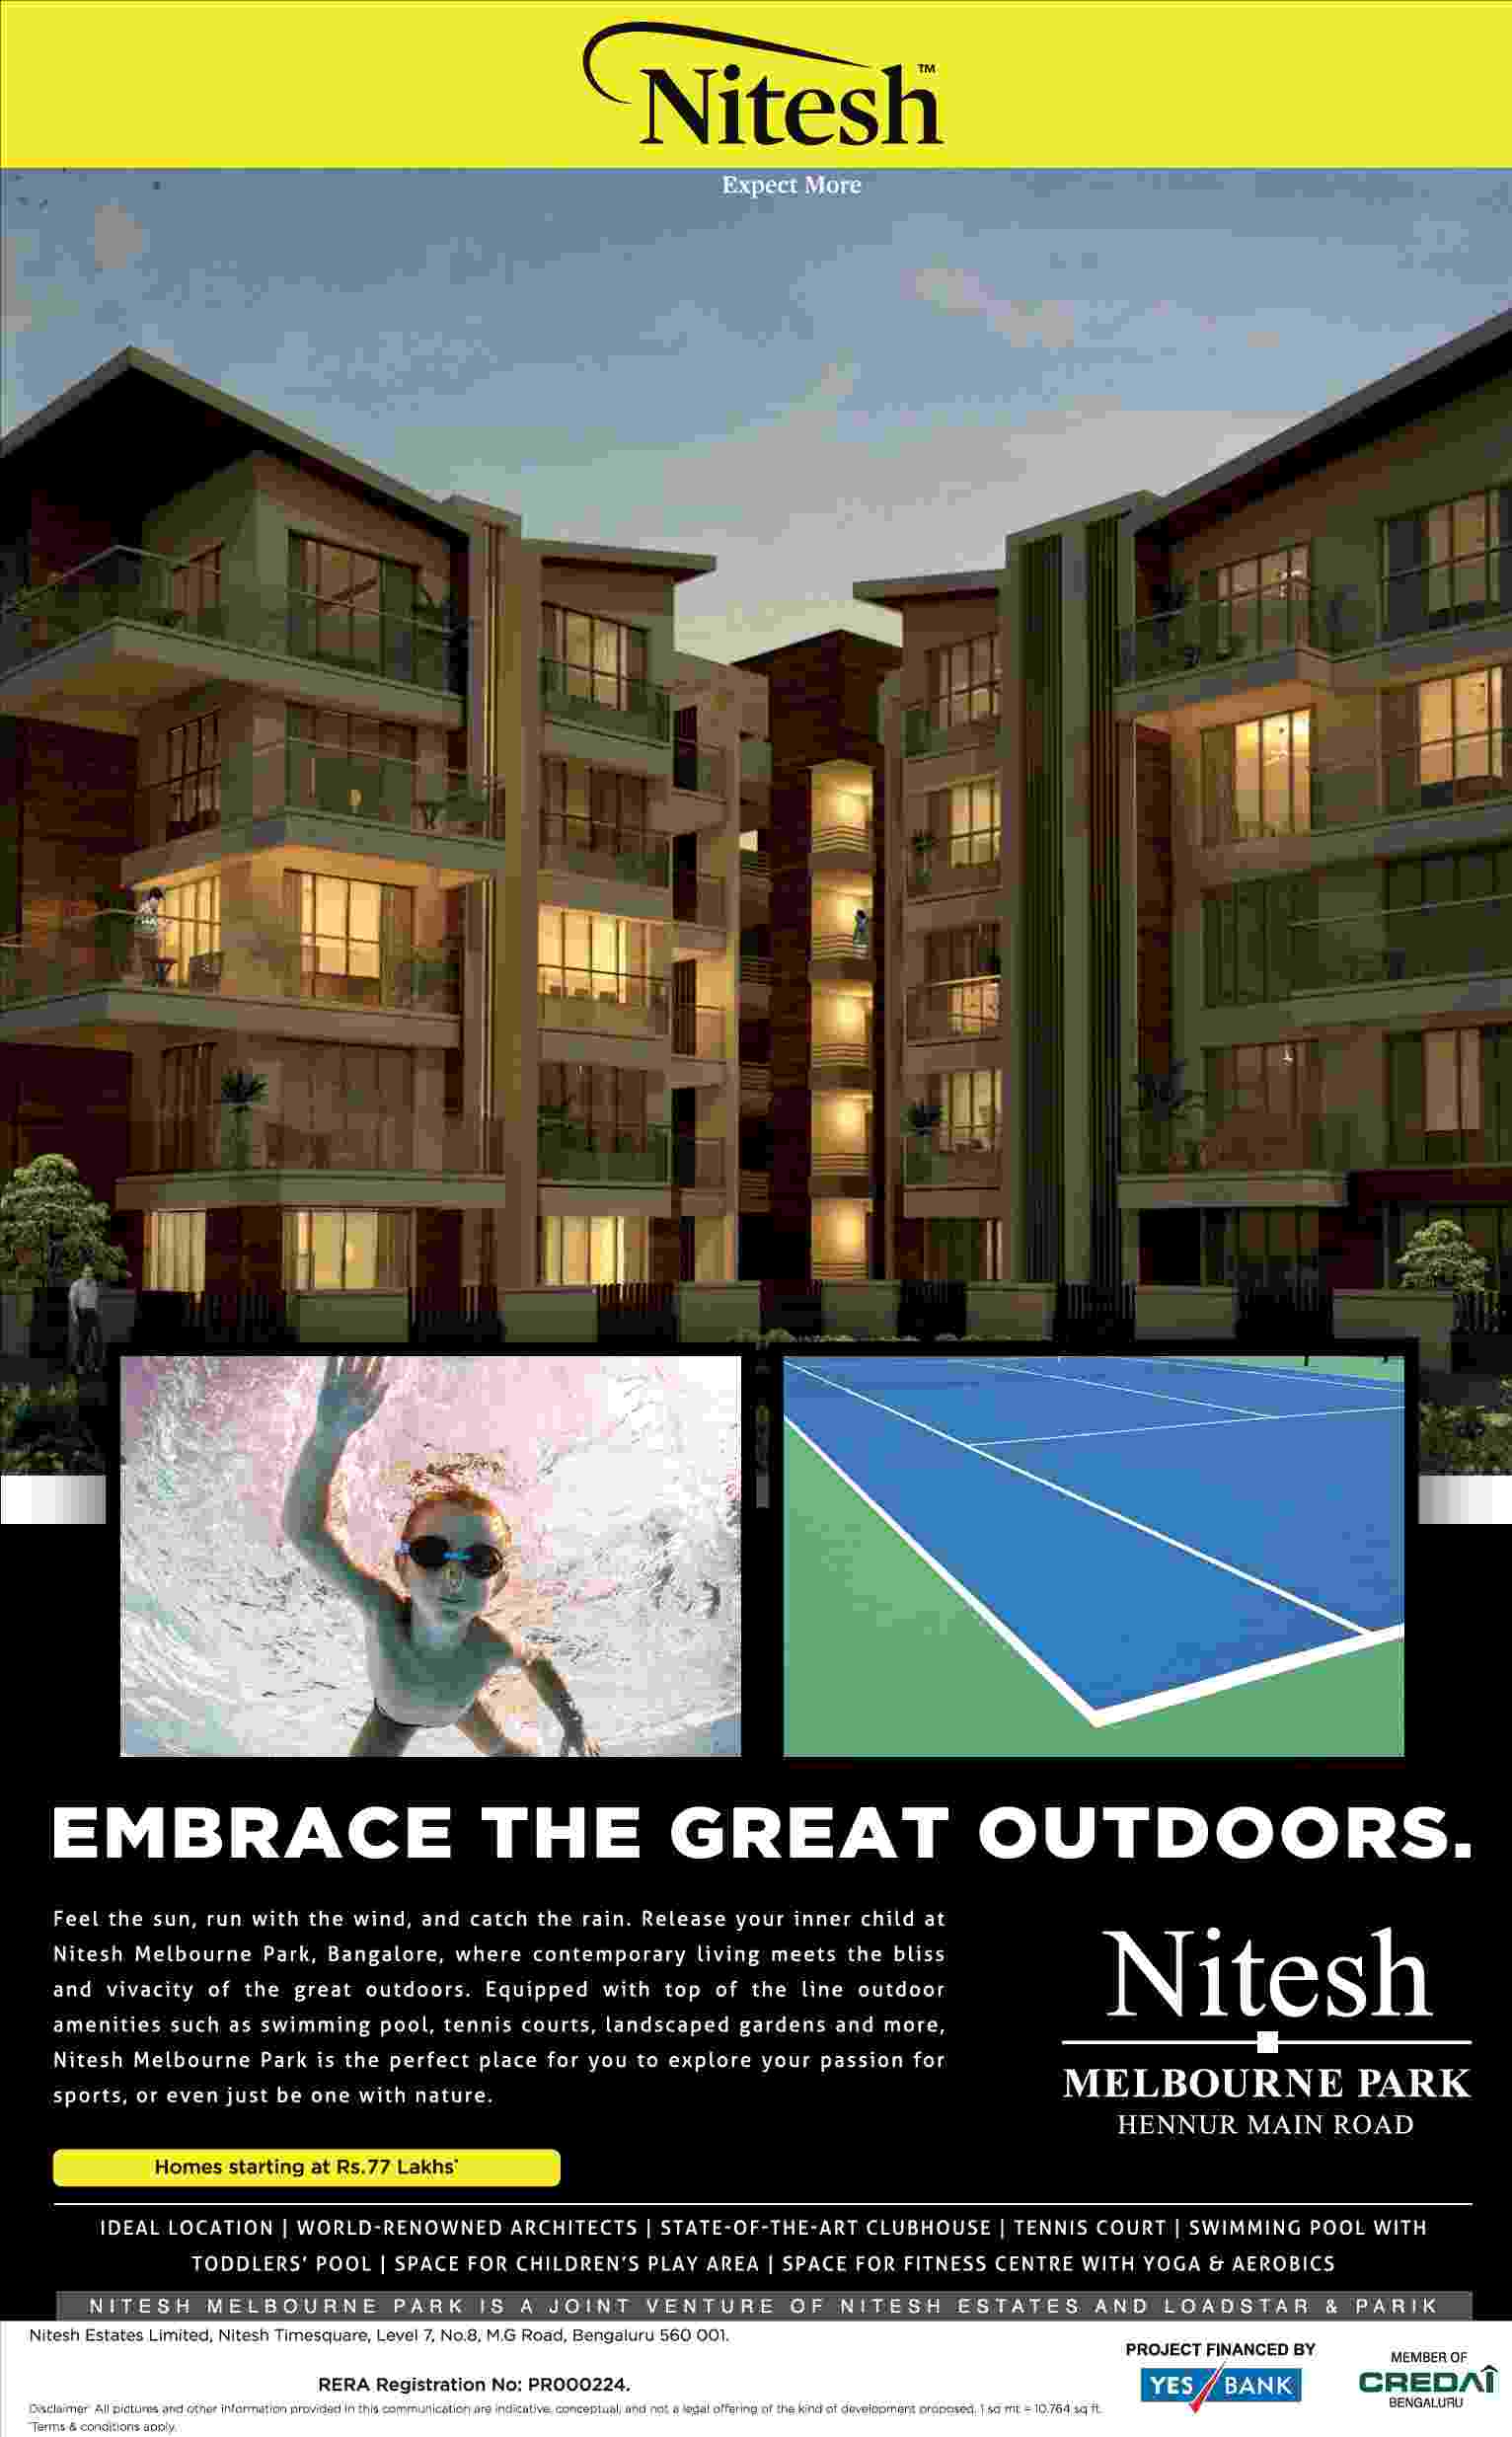 Embrace the great outdoors at Nitesh Melbourne Park in Bangalore